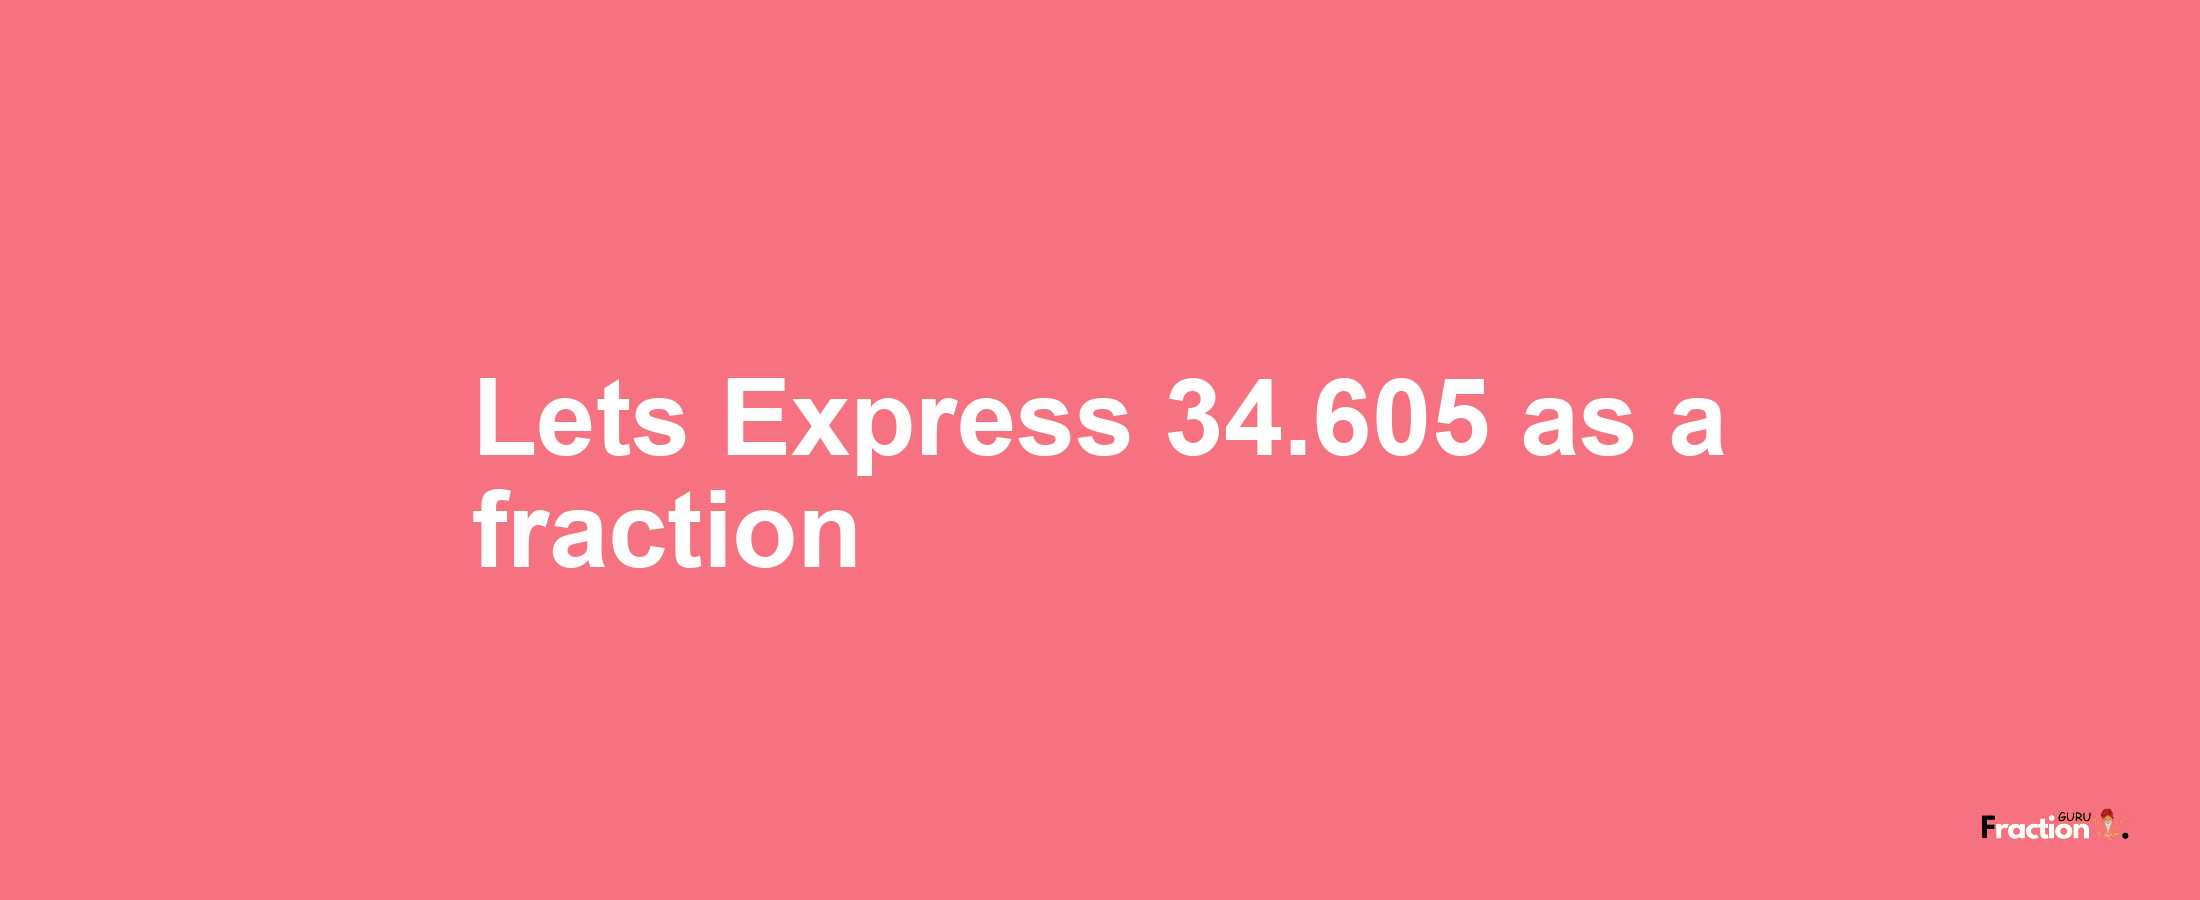 Lets Express 34.605 as afraction